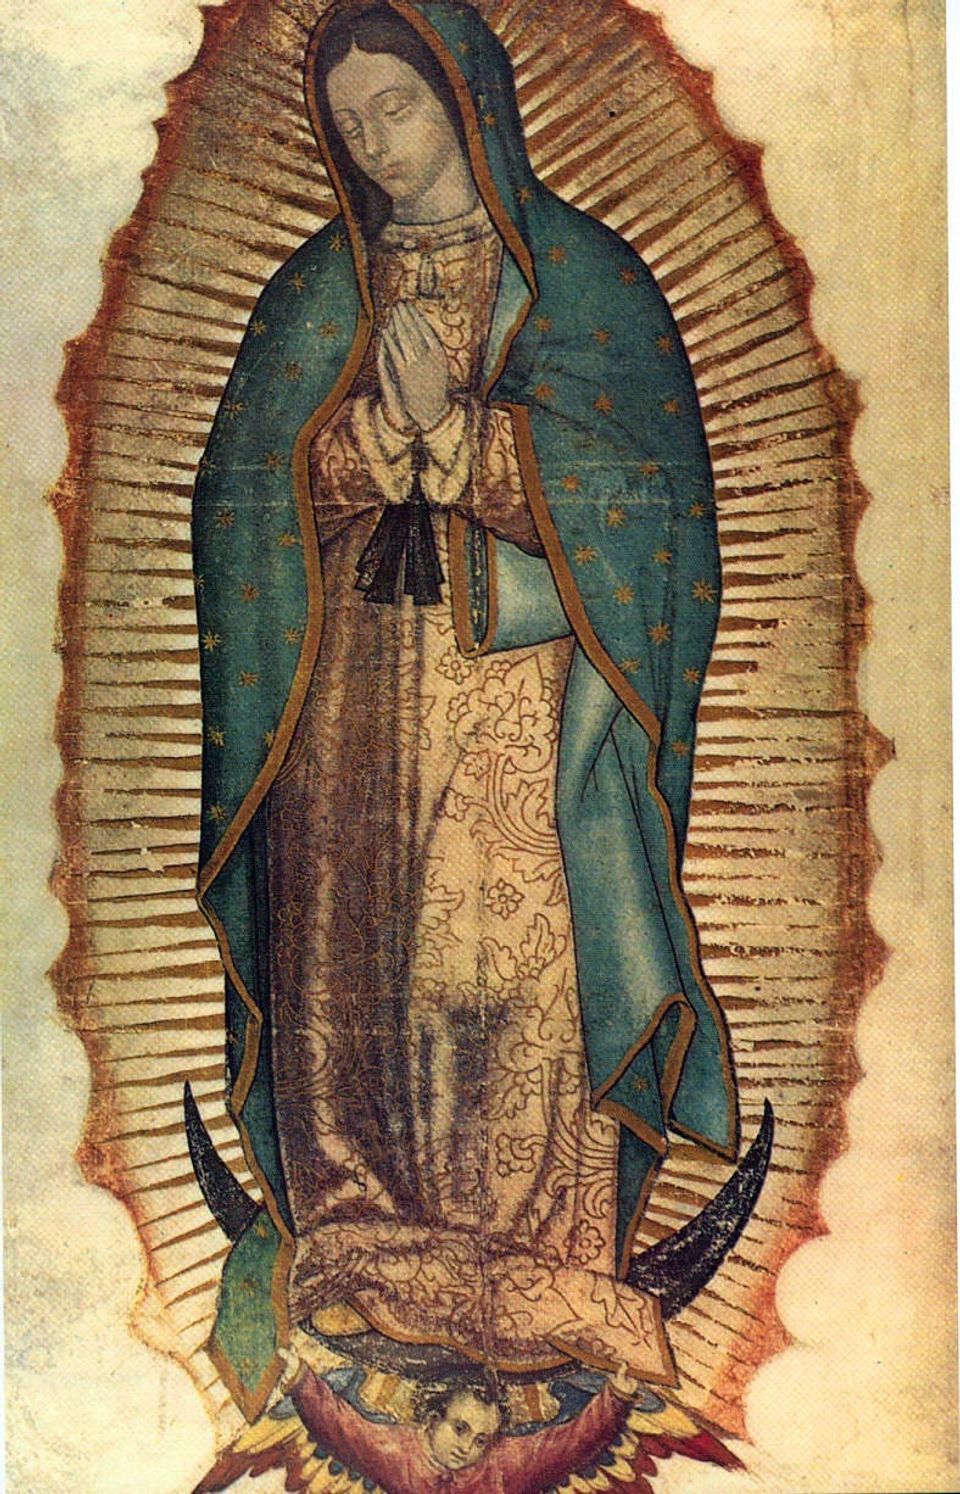 An artwork image of a the Virgin of Guadalupe.